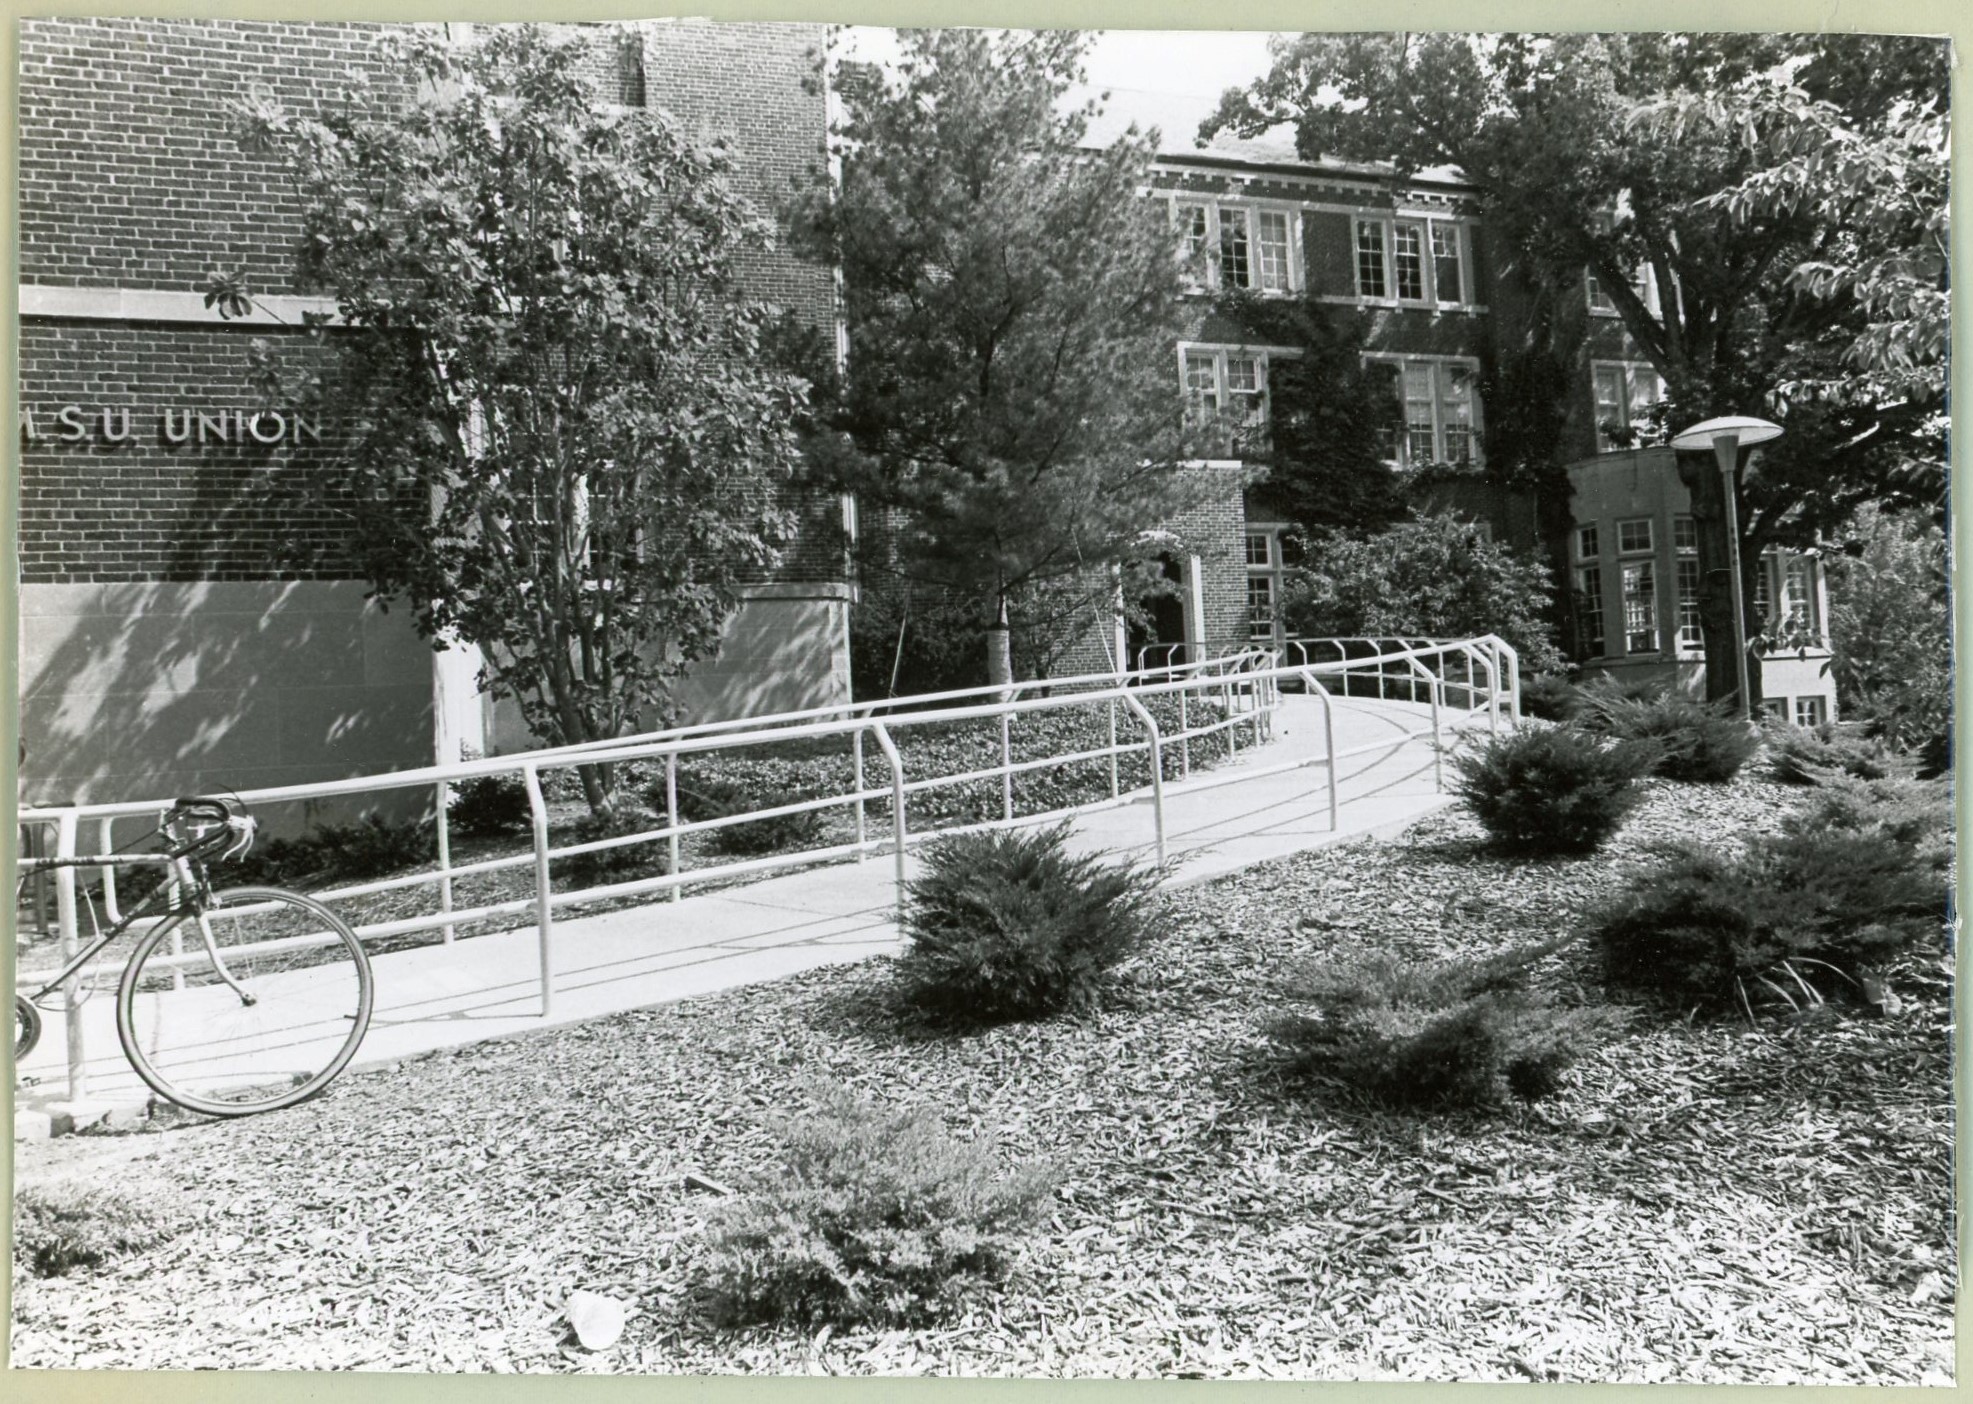 Image of wheelchair ramp constructed on MSU campus